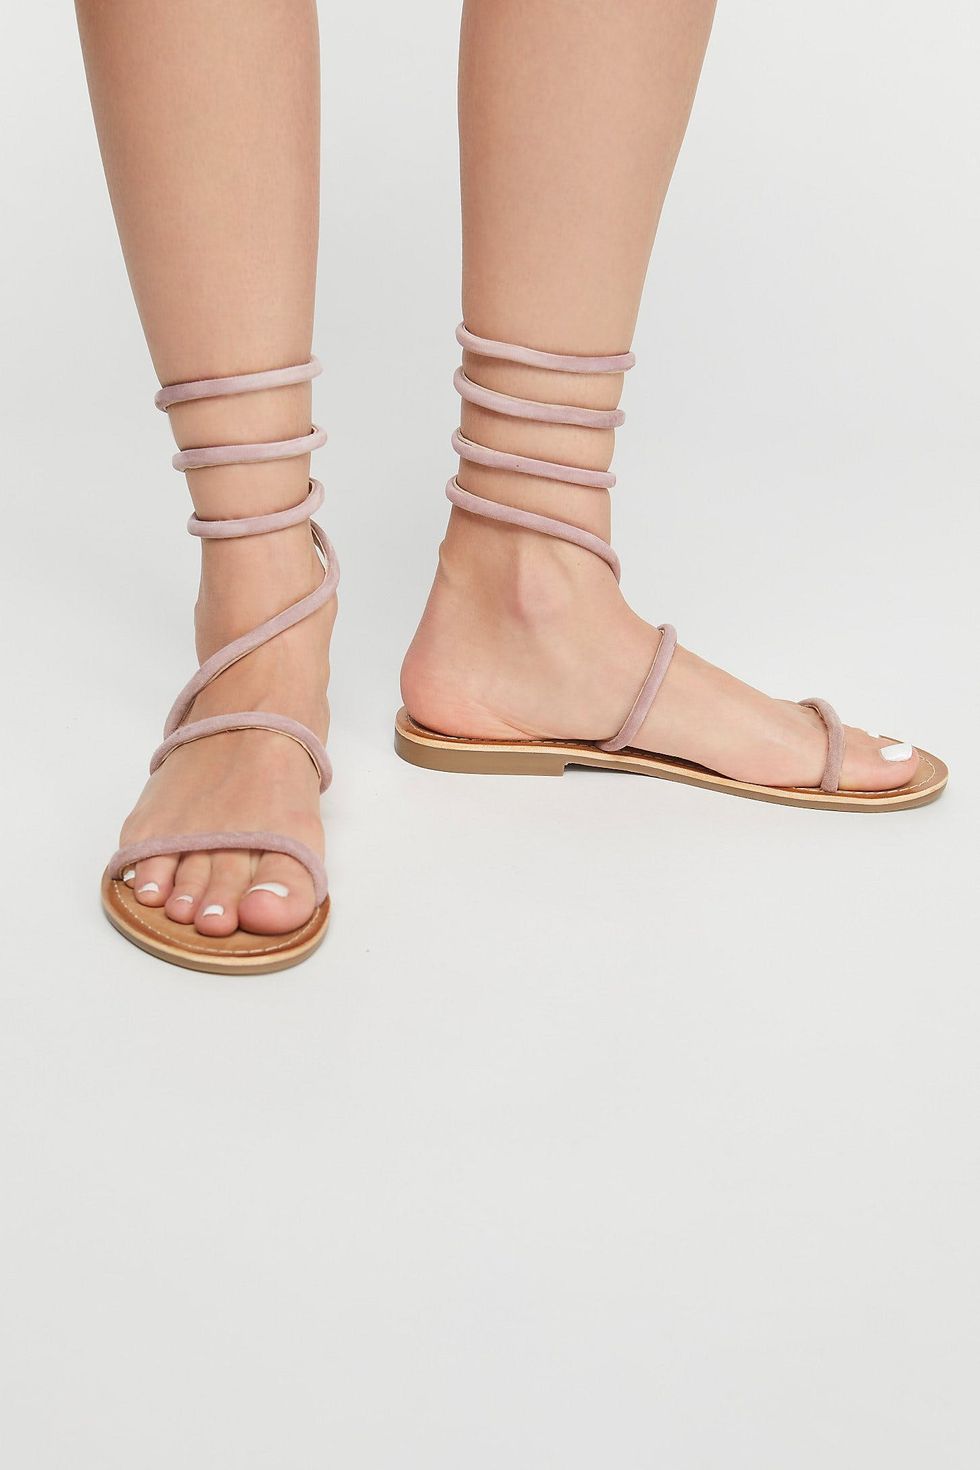 16 Barely There Strappy Sandals to Strut in All Summer Long - Brit + Co